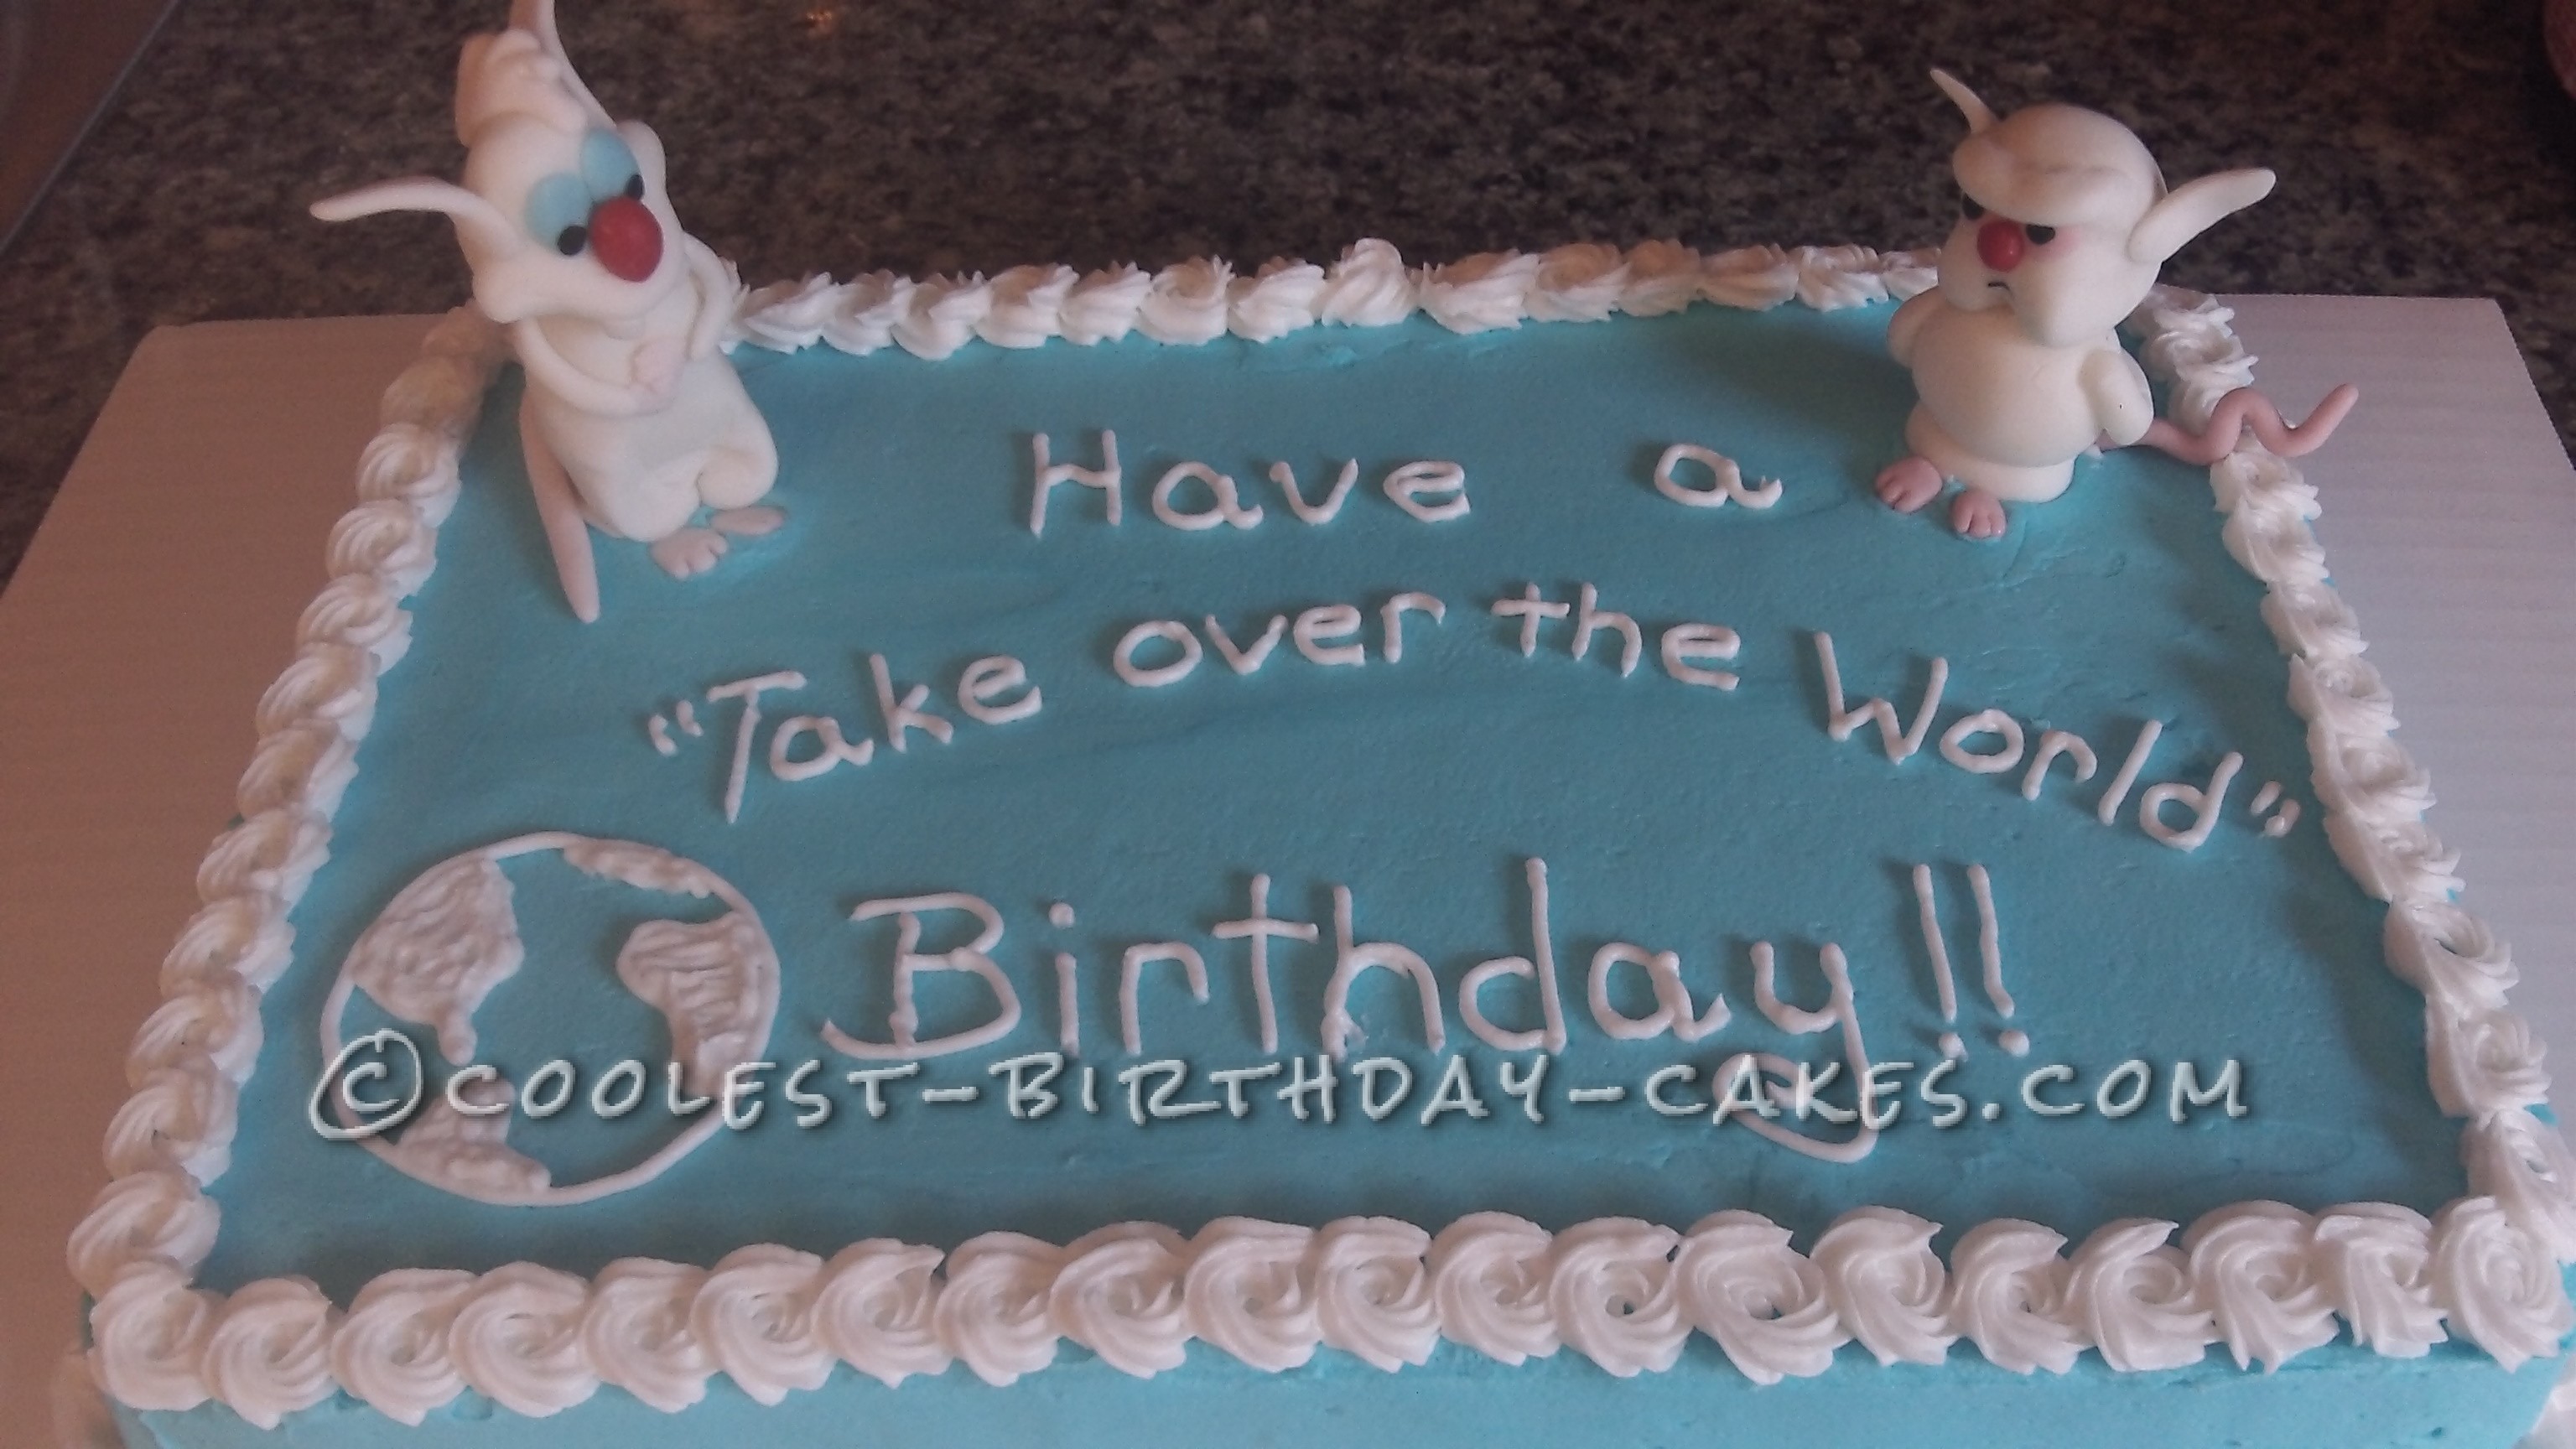 Coolest Pinky and the Brain Cake